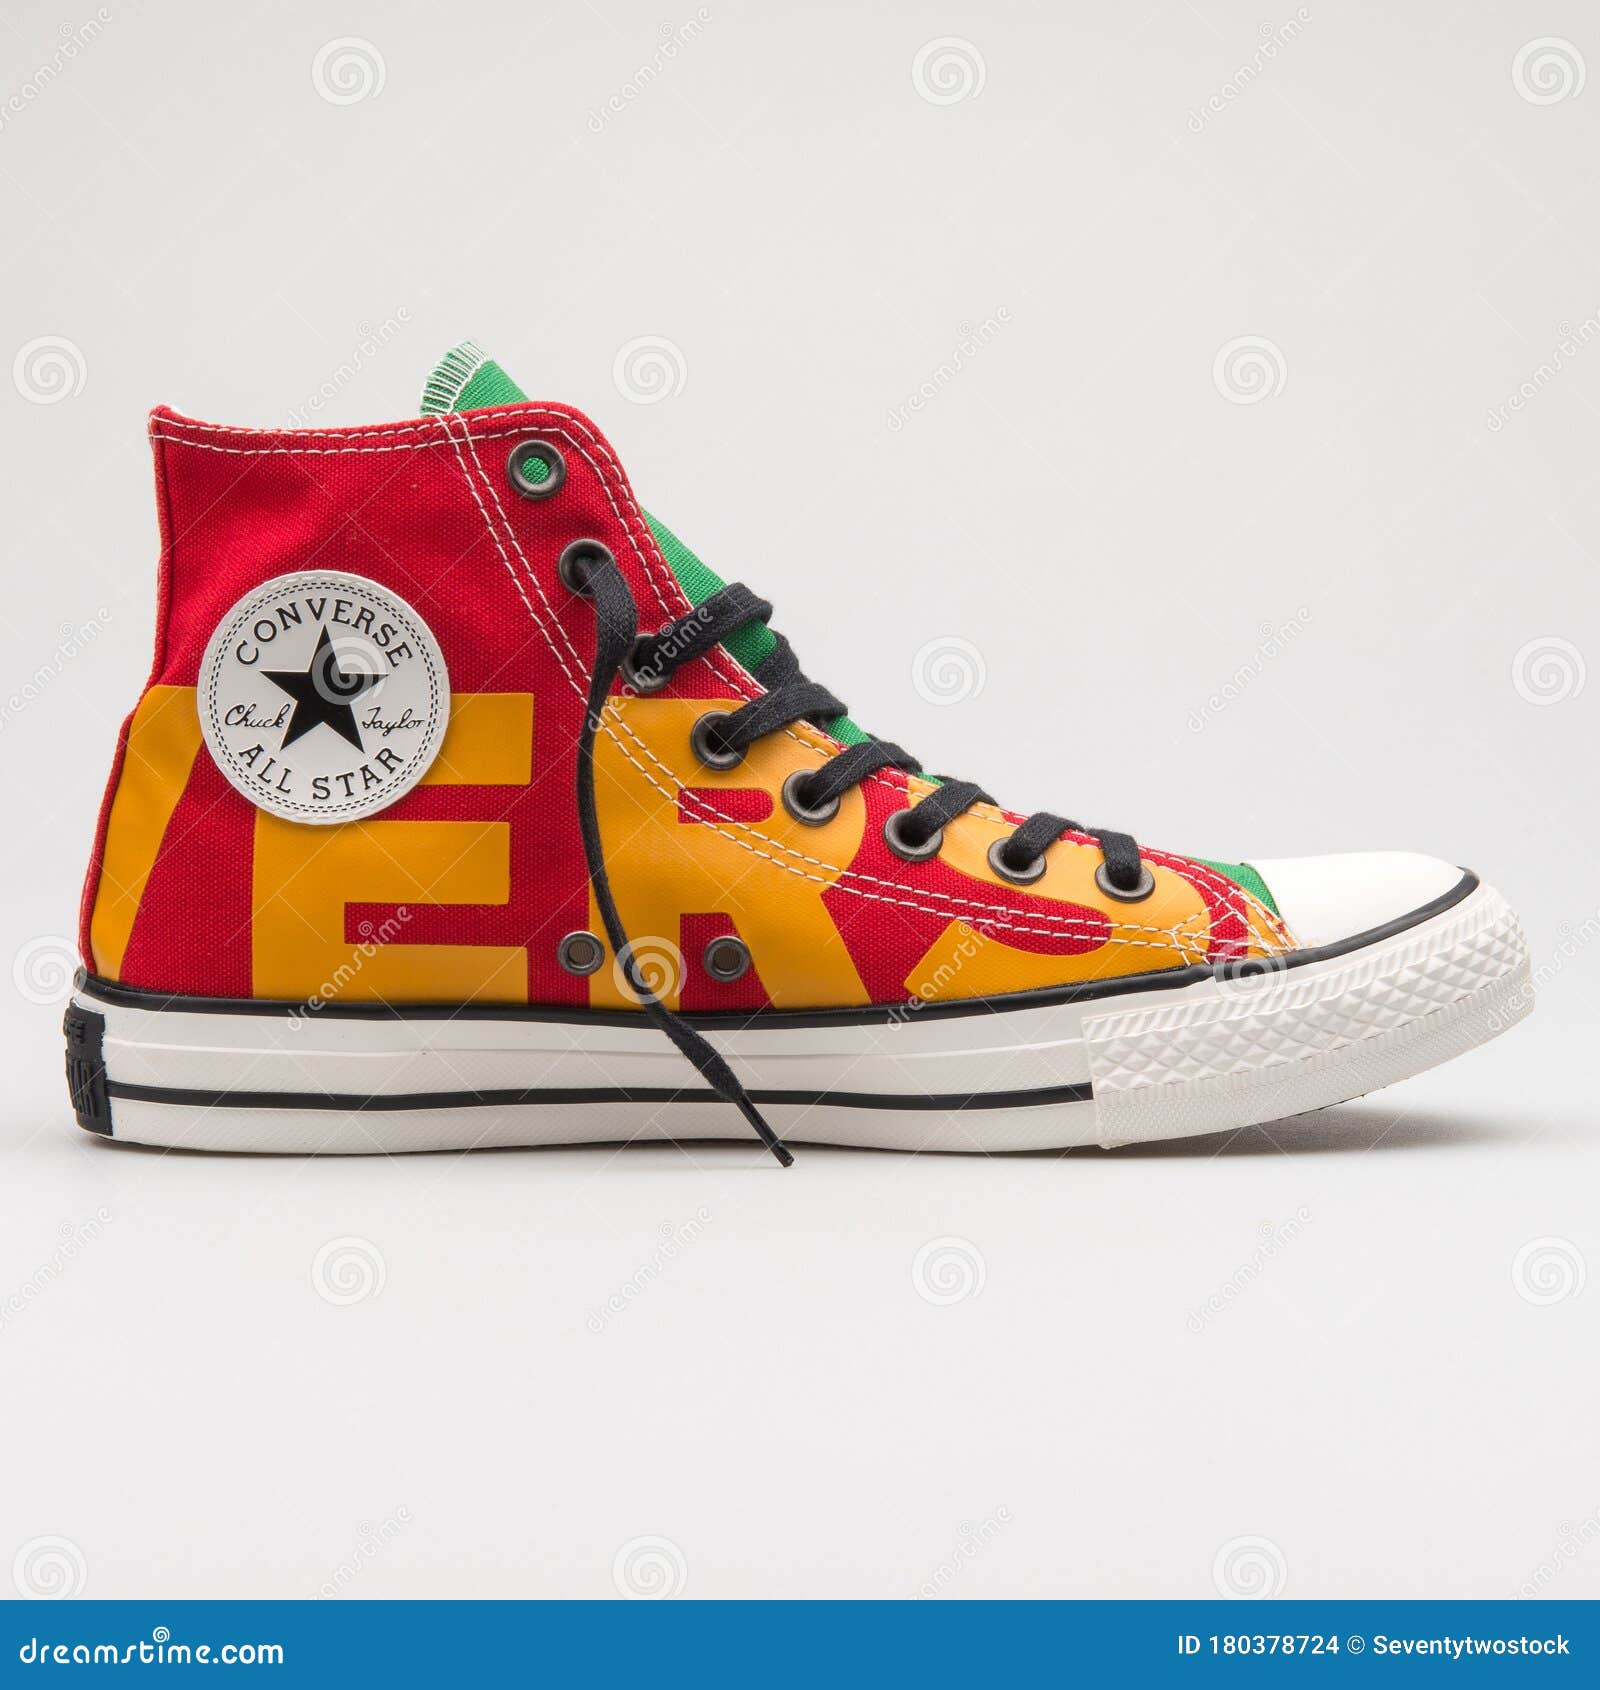 Converse Chuck Taylor All Star High Red, Yellow and Green Sneaker Editorial Stock Image - Image of fashion,